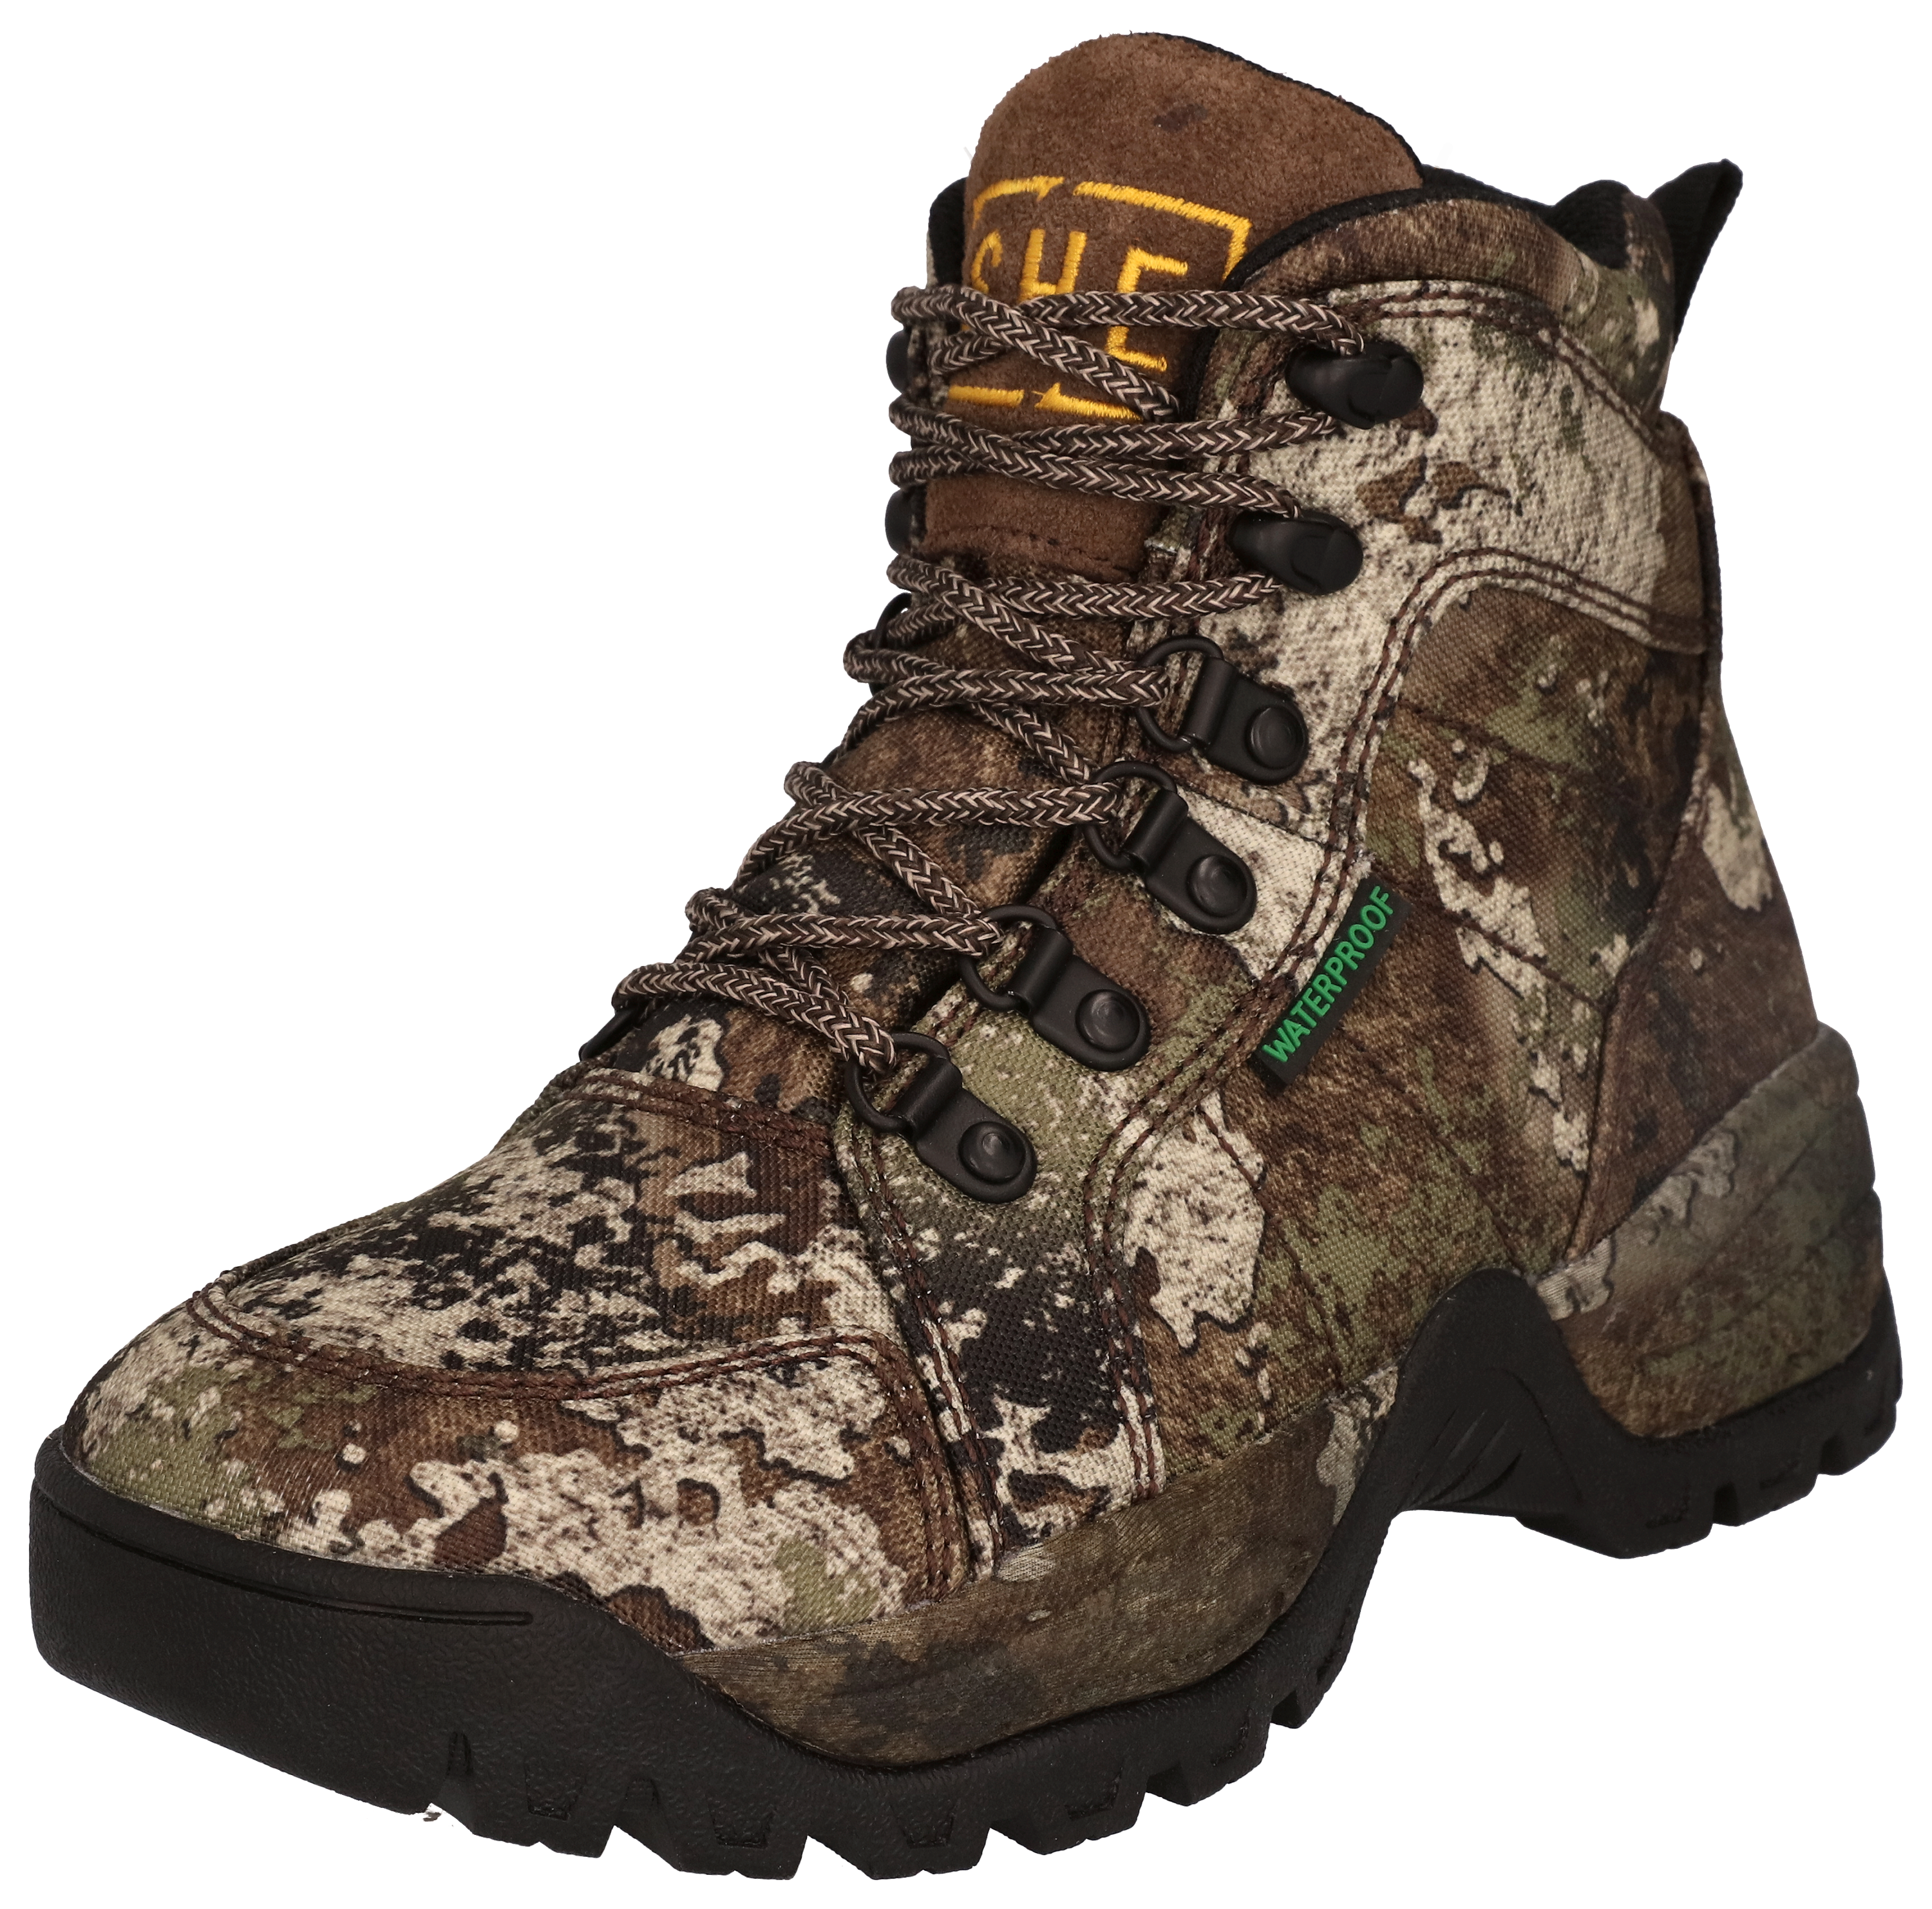 SHE Outdoor Timber Buck Waterproof Hunting Boots for Ladies - TrueTimber Strata - 10M